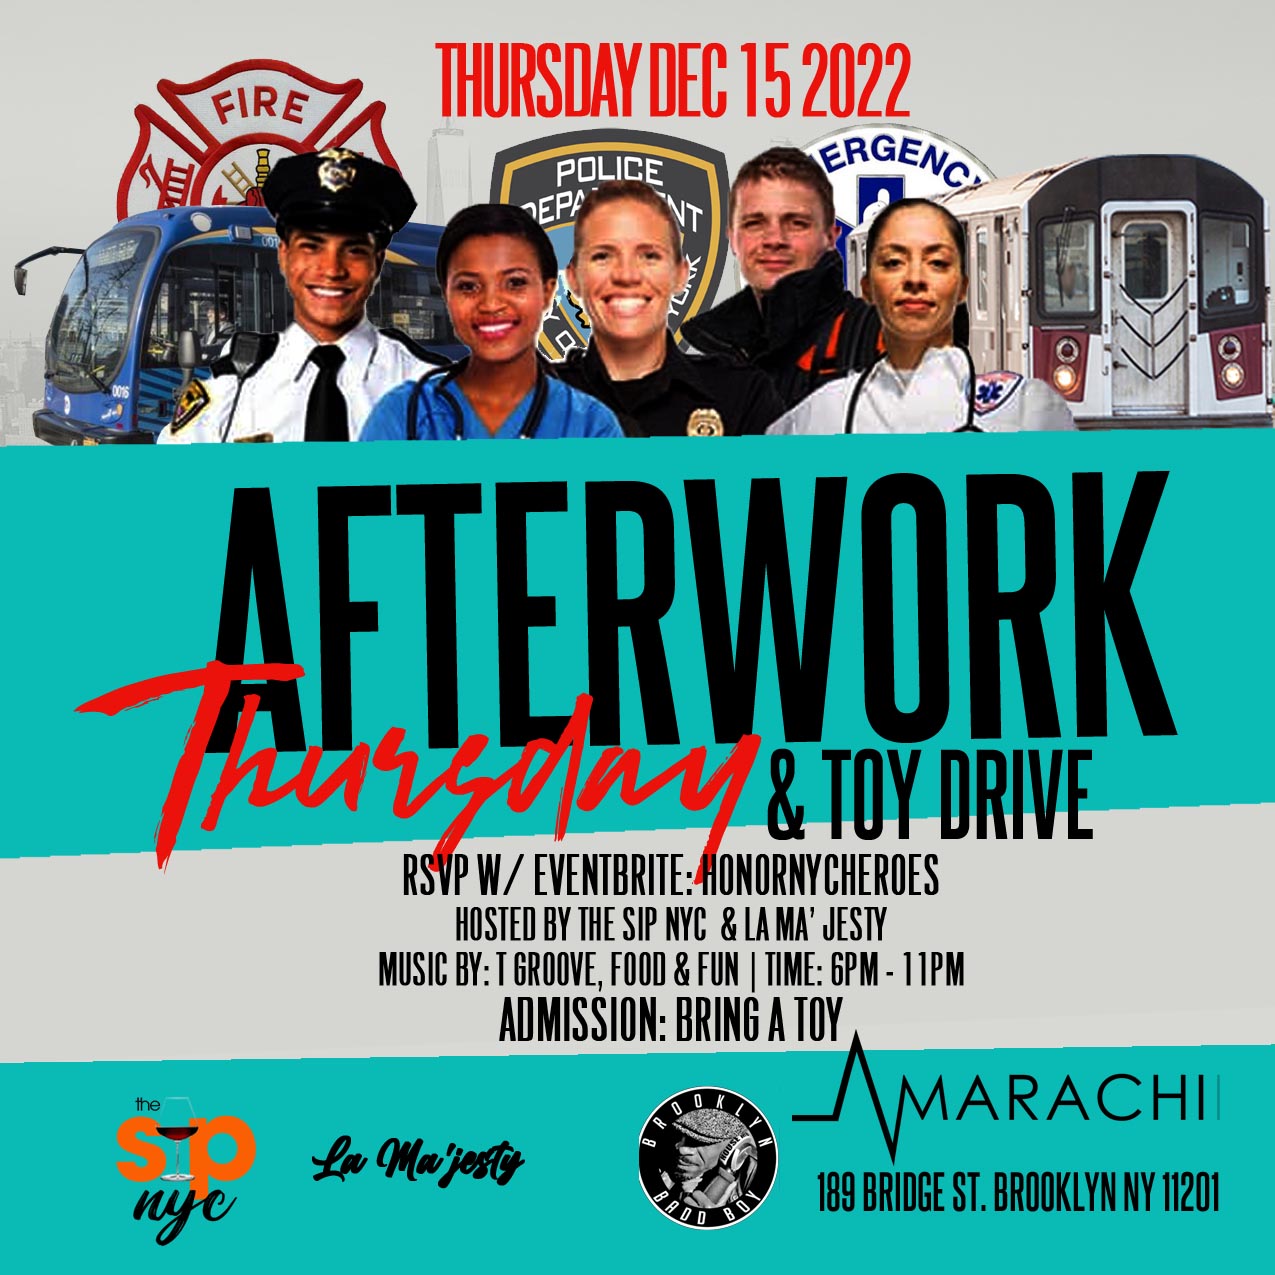 The Sip NYC Afterwork Toy Drive